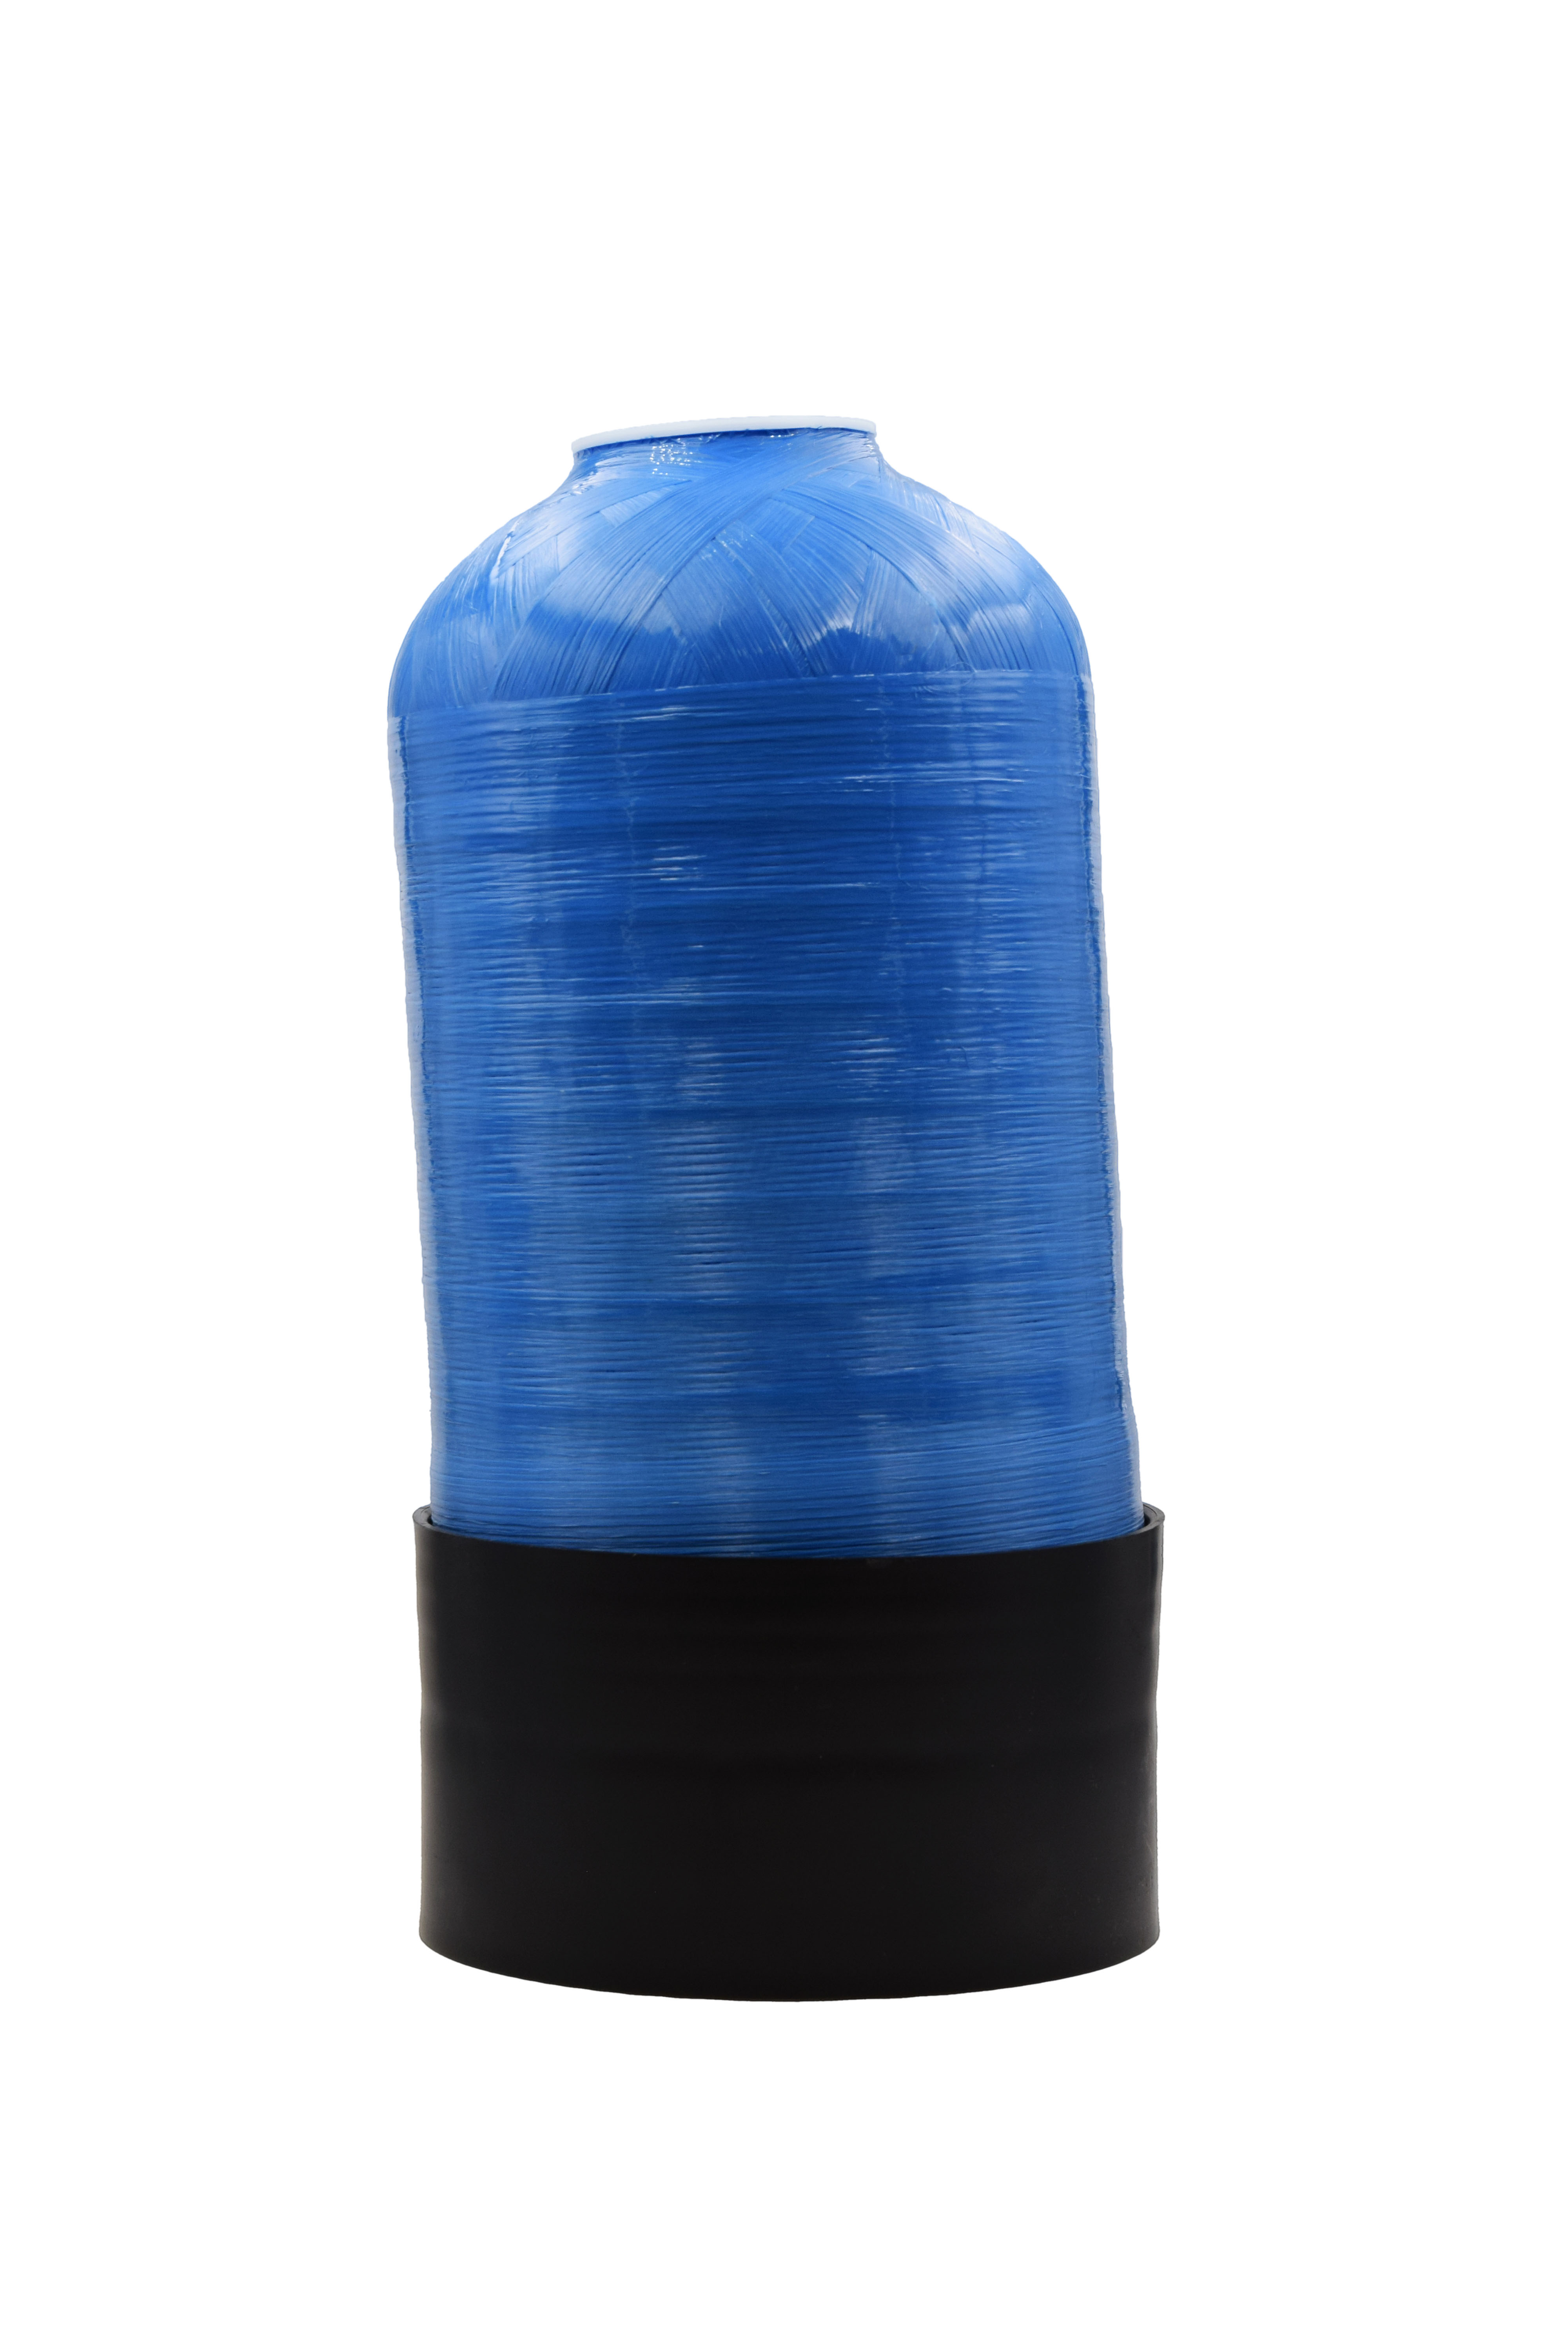 6 Liter Plastic Mixed Bed Demineralization Cartridge Filled with Premium Resin